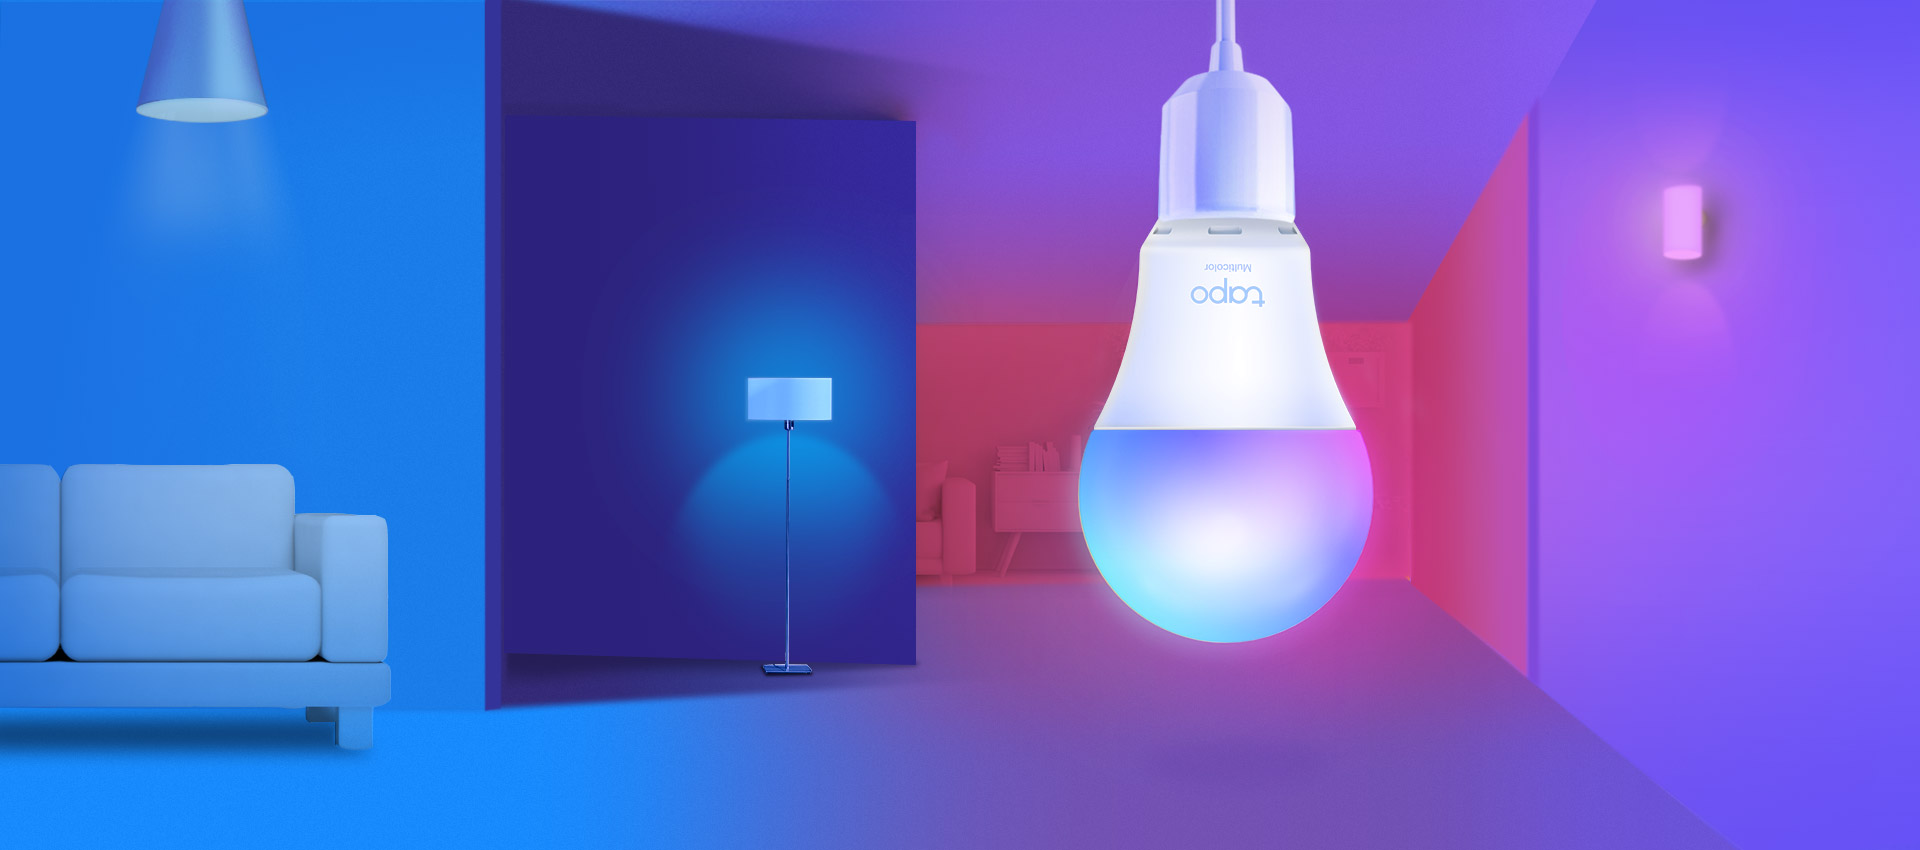 TP-Link - Tapo L530 LED bulb produces up to 806 lumens